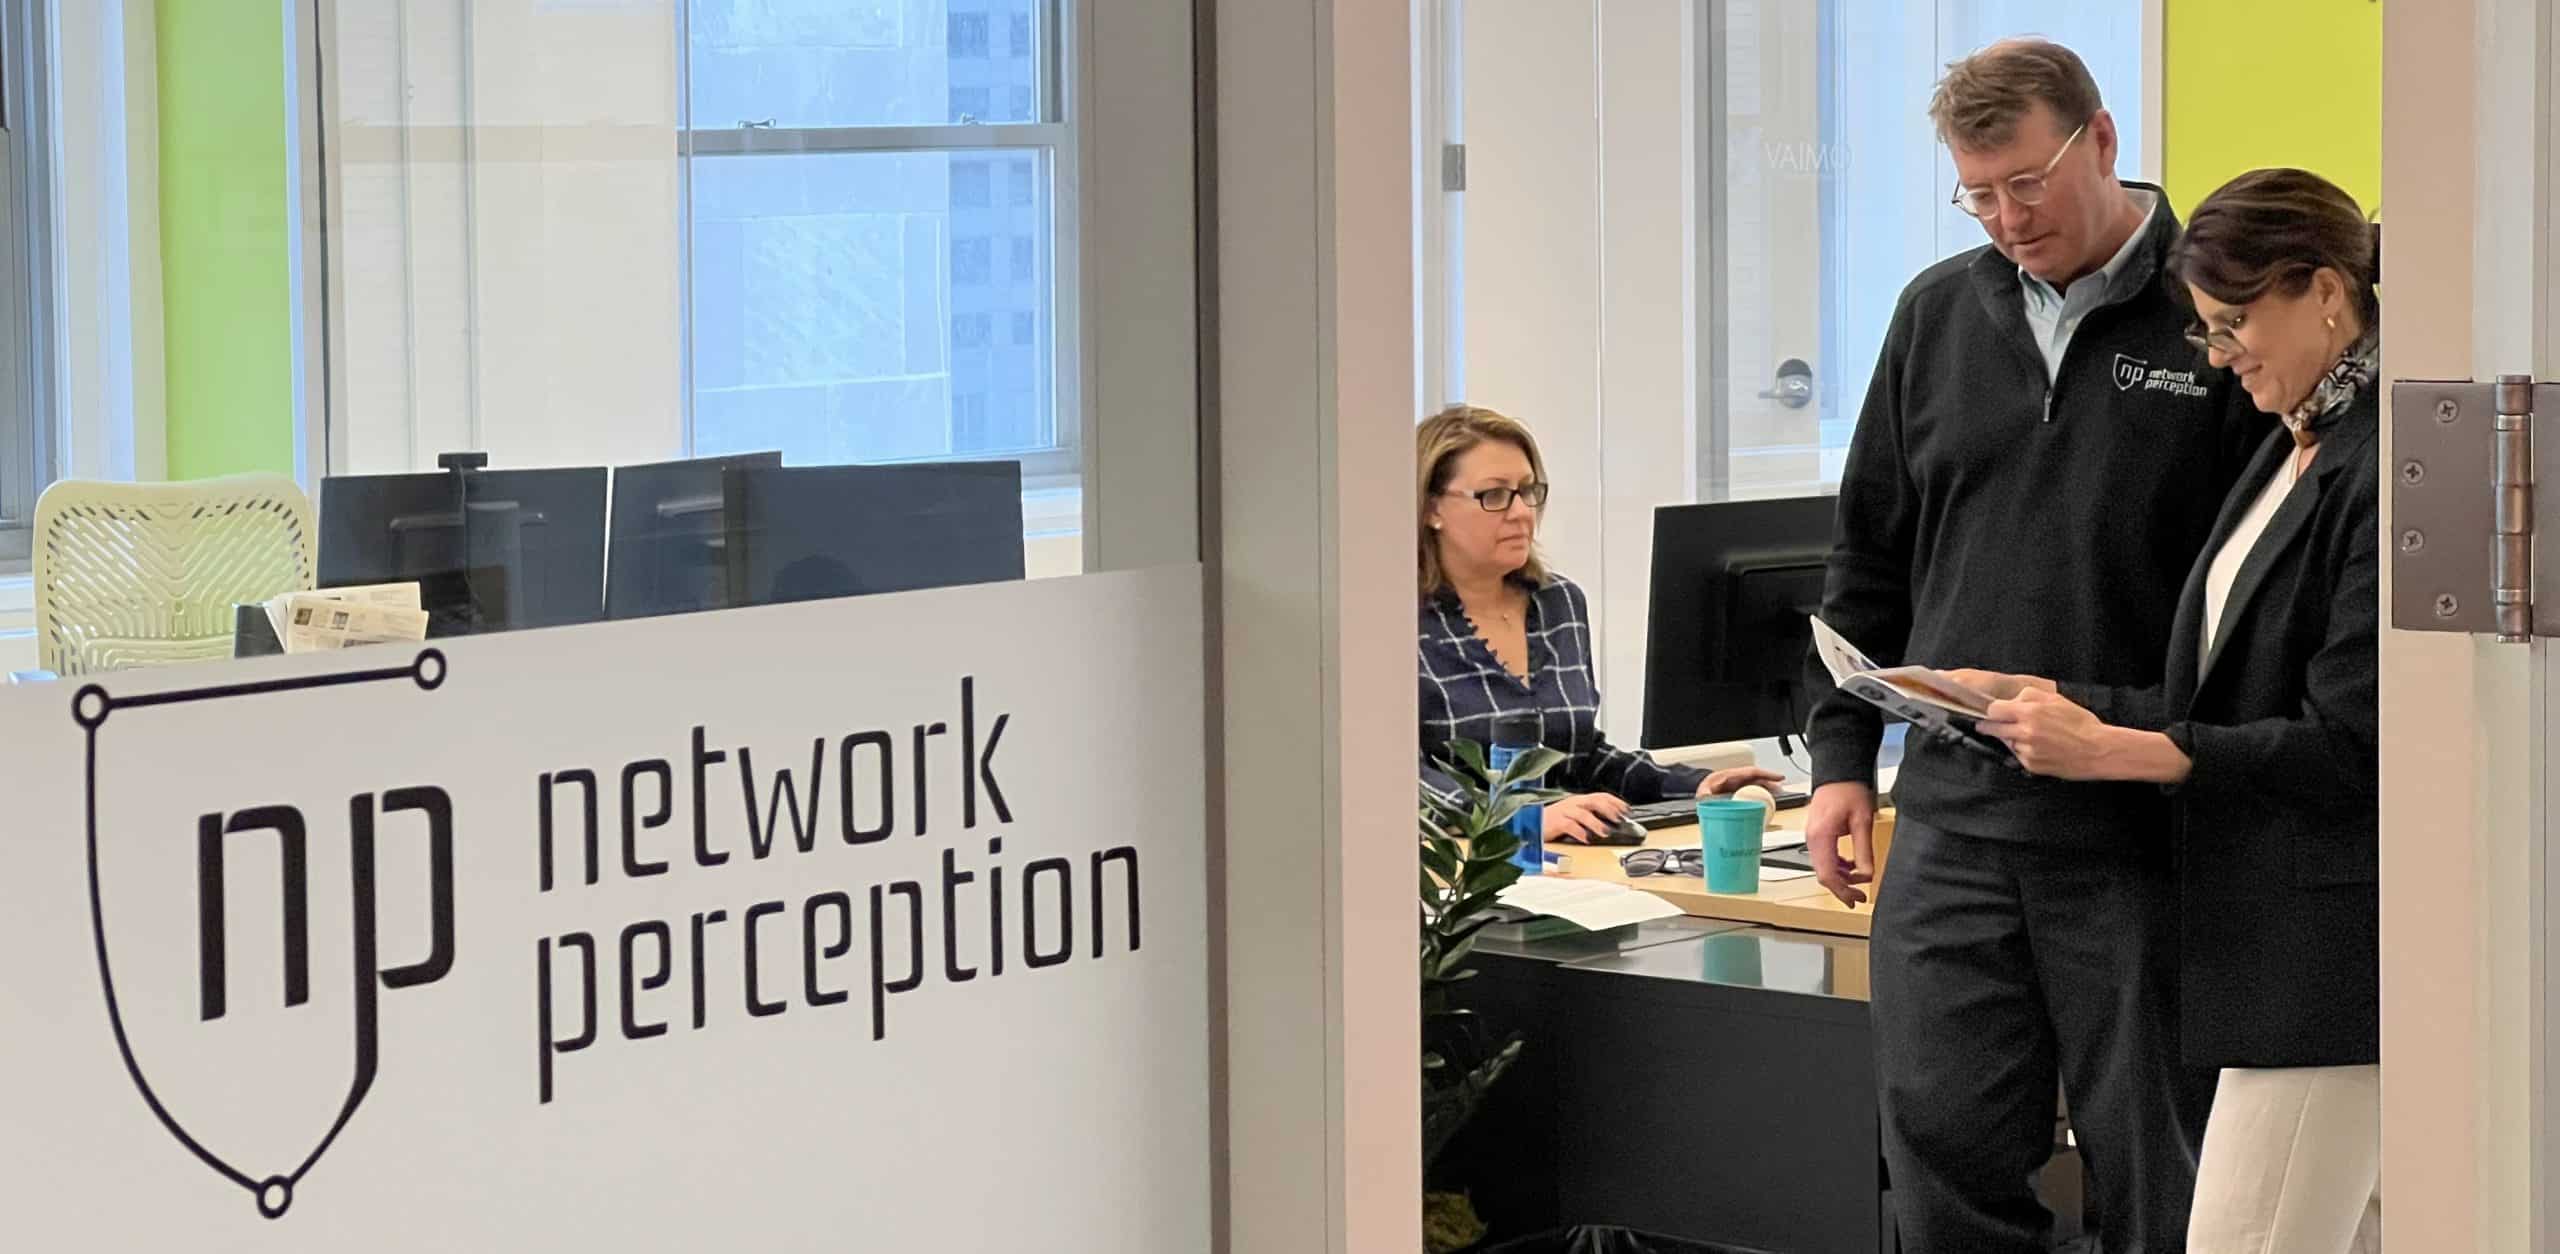 network perception employees looking at a booklet